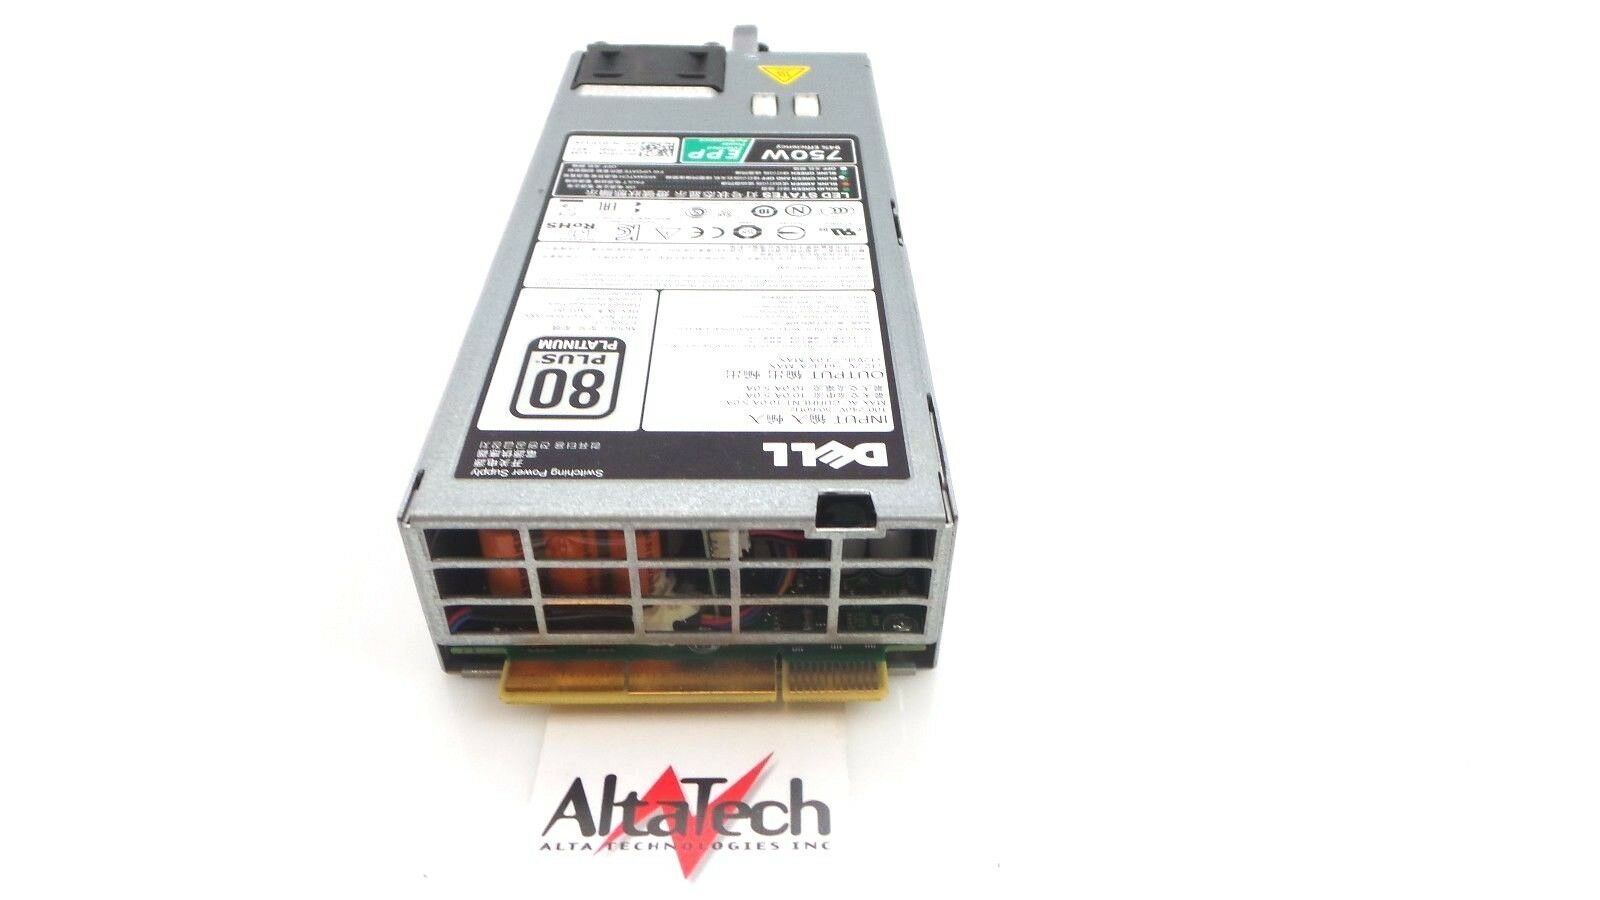 Dell 953MX PowerEdge R730 750W Power Supply, Used